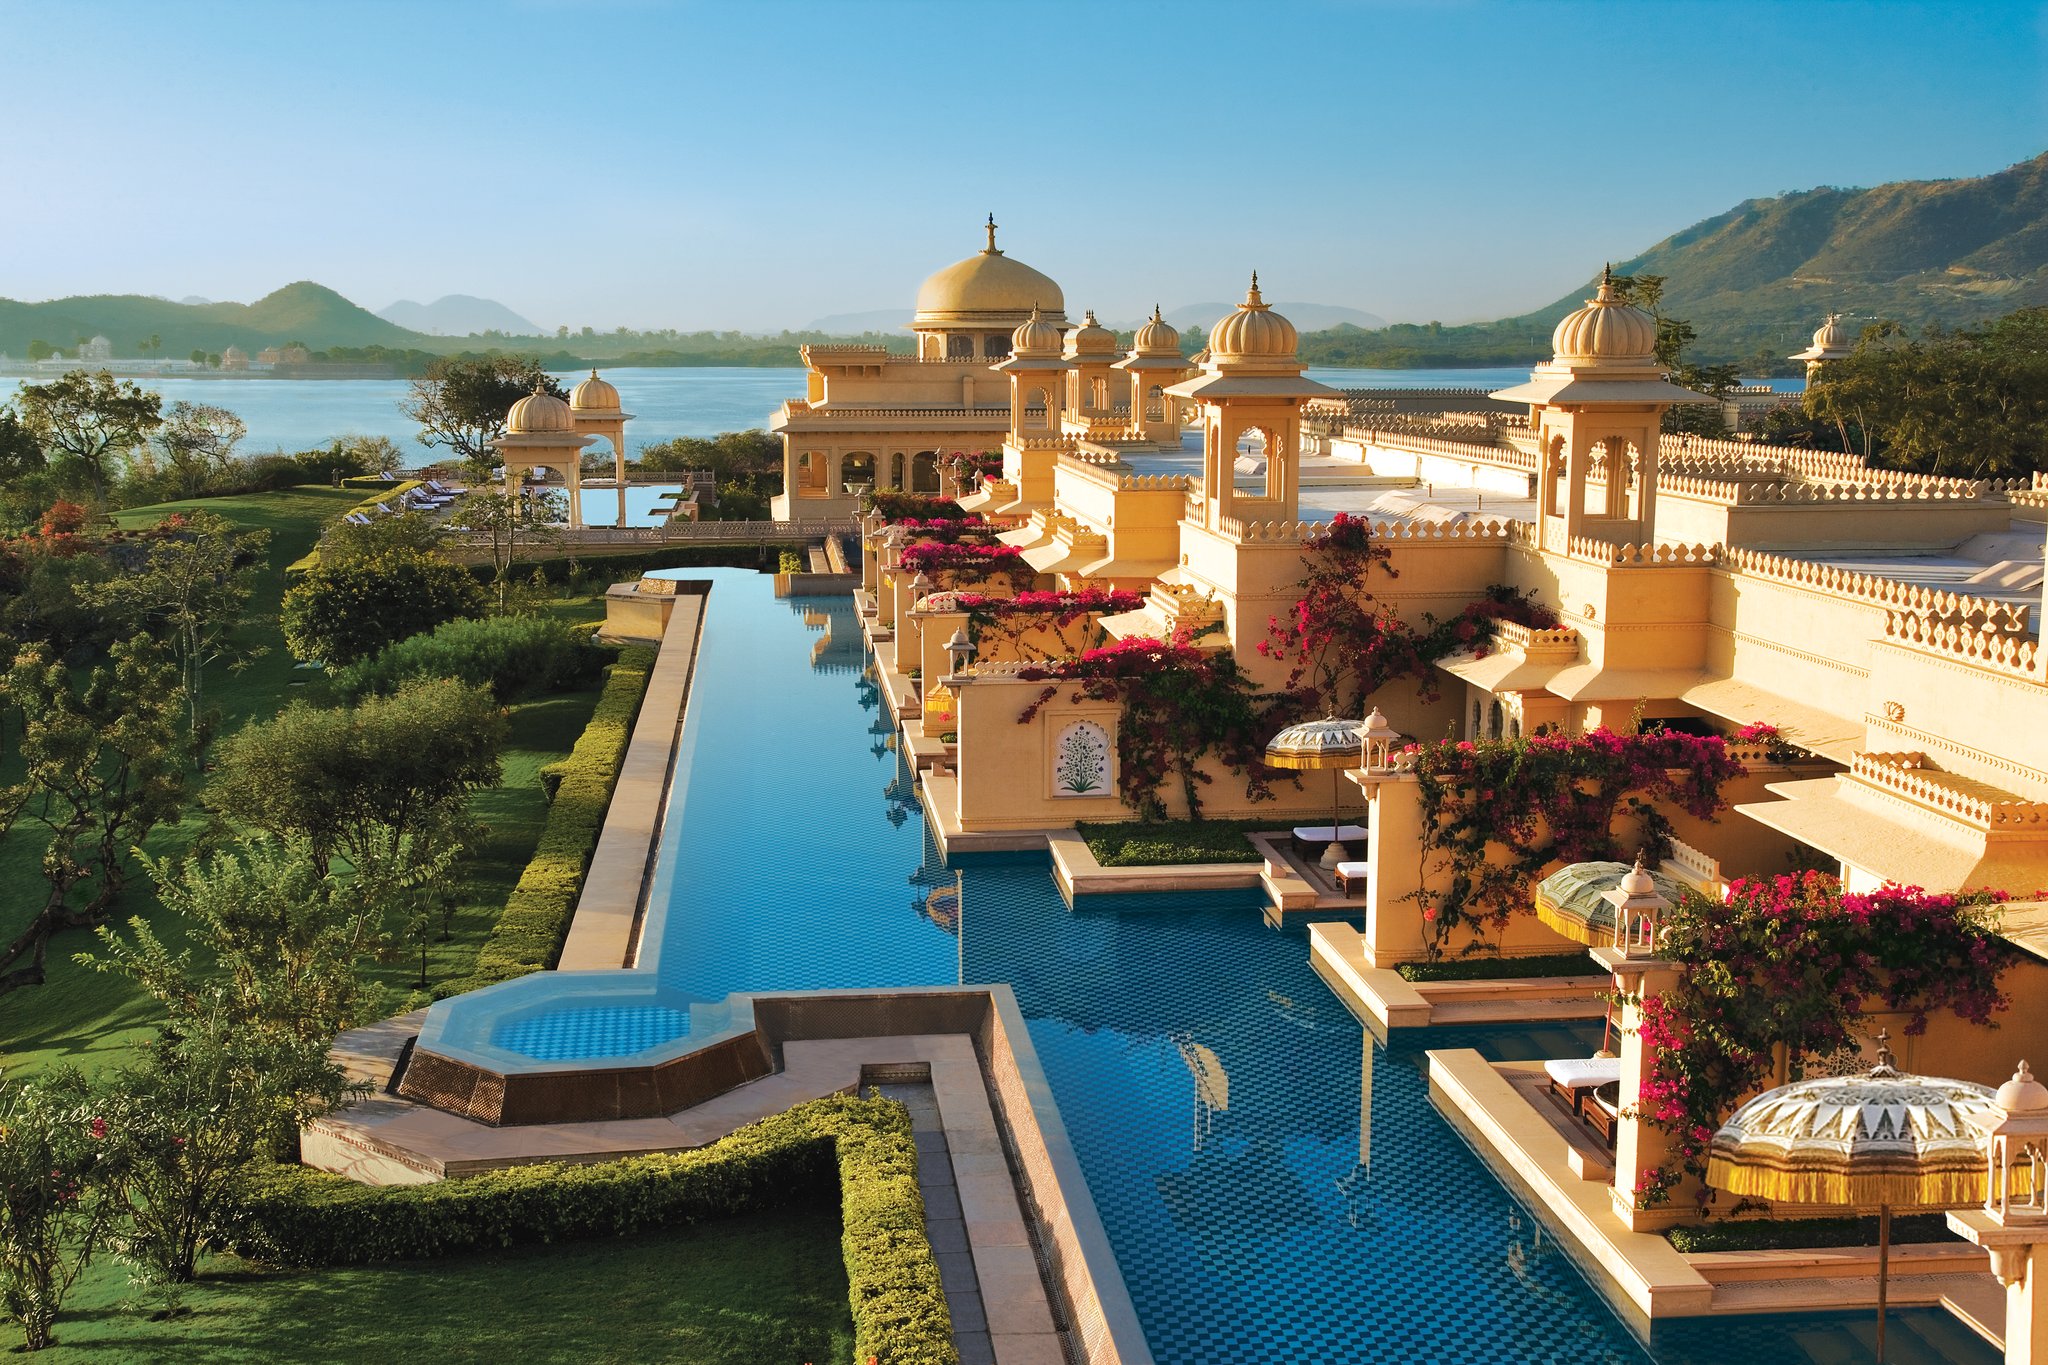 Sunrise over the deluxe rooms with semi private pool at the luxurious honeymoon destination Udaivilâs Oberoi Hotel. Udaipur.